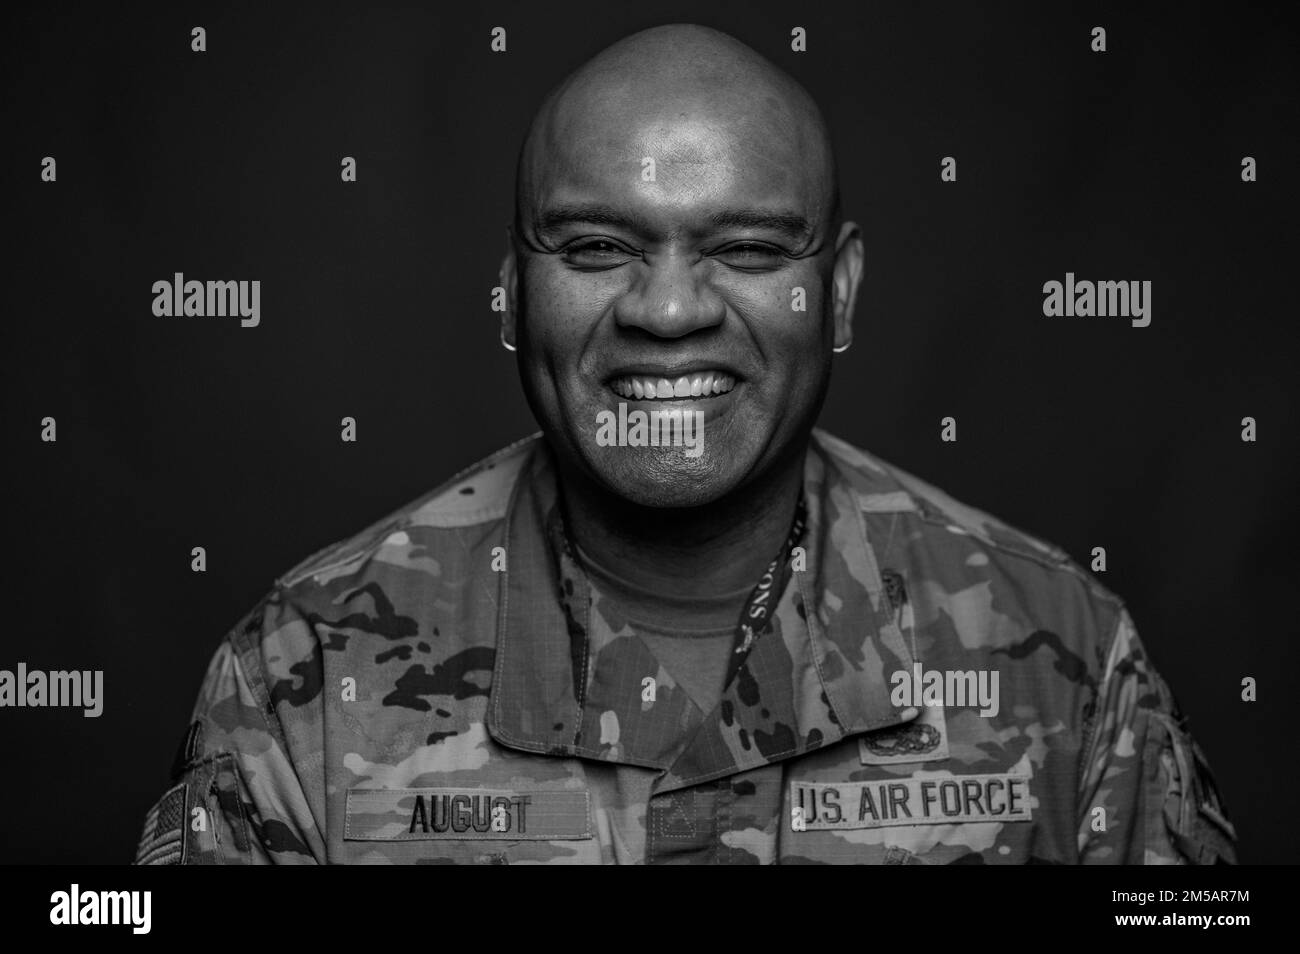 Chief Master Sgt. Christopher August. 8th Fighter Wing weapons manager, speaks about his U.S. Air Force career and his journey in earning the rank of chief. August has served for 26 years, and hopes to inspire future Black leaders. Stock Photo